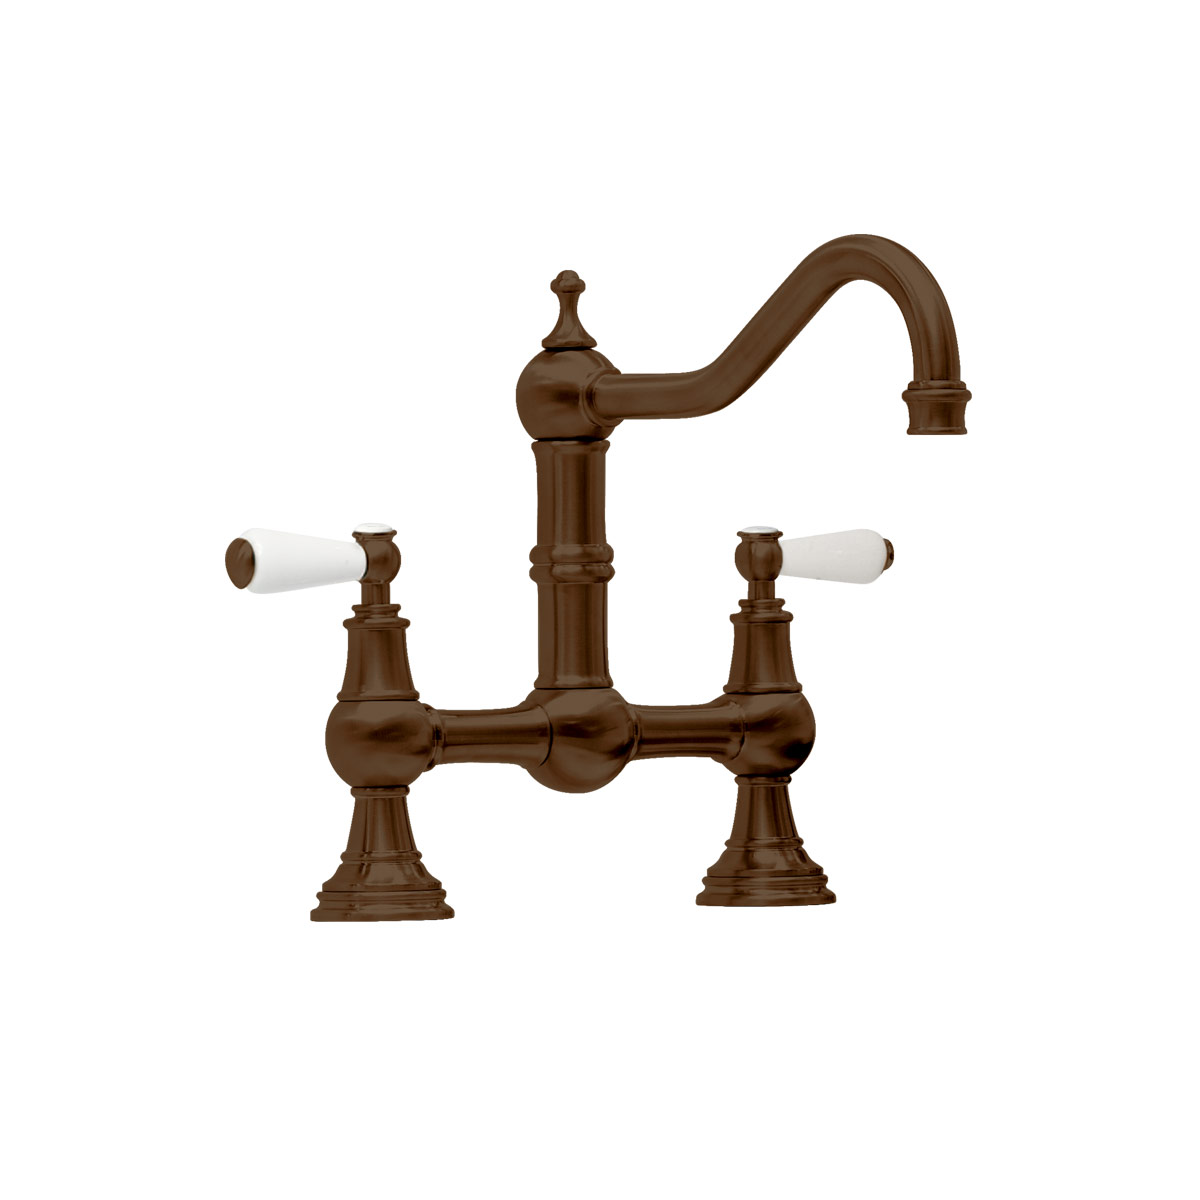 Shaws by Perrin & Rowe Hambleton French bridge mixer in English Bronze. Provence style kitchen tap AUSH.4751. Distributed in Australia by Luxe by Design, Brisbane.